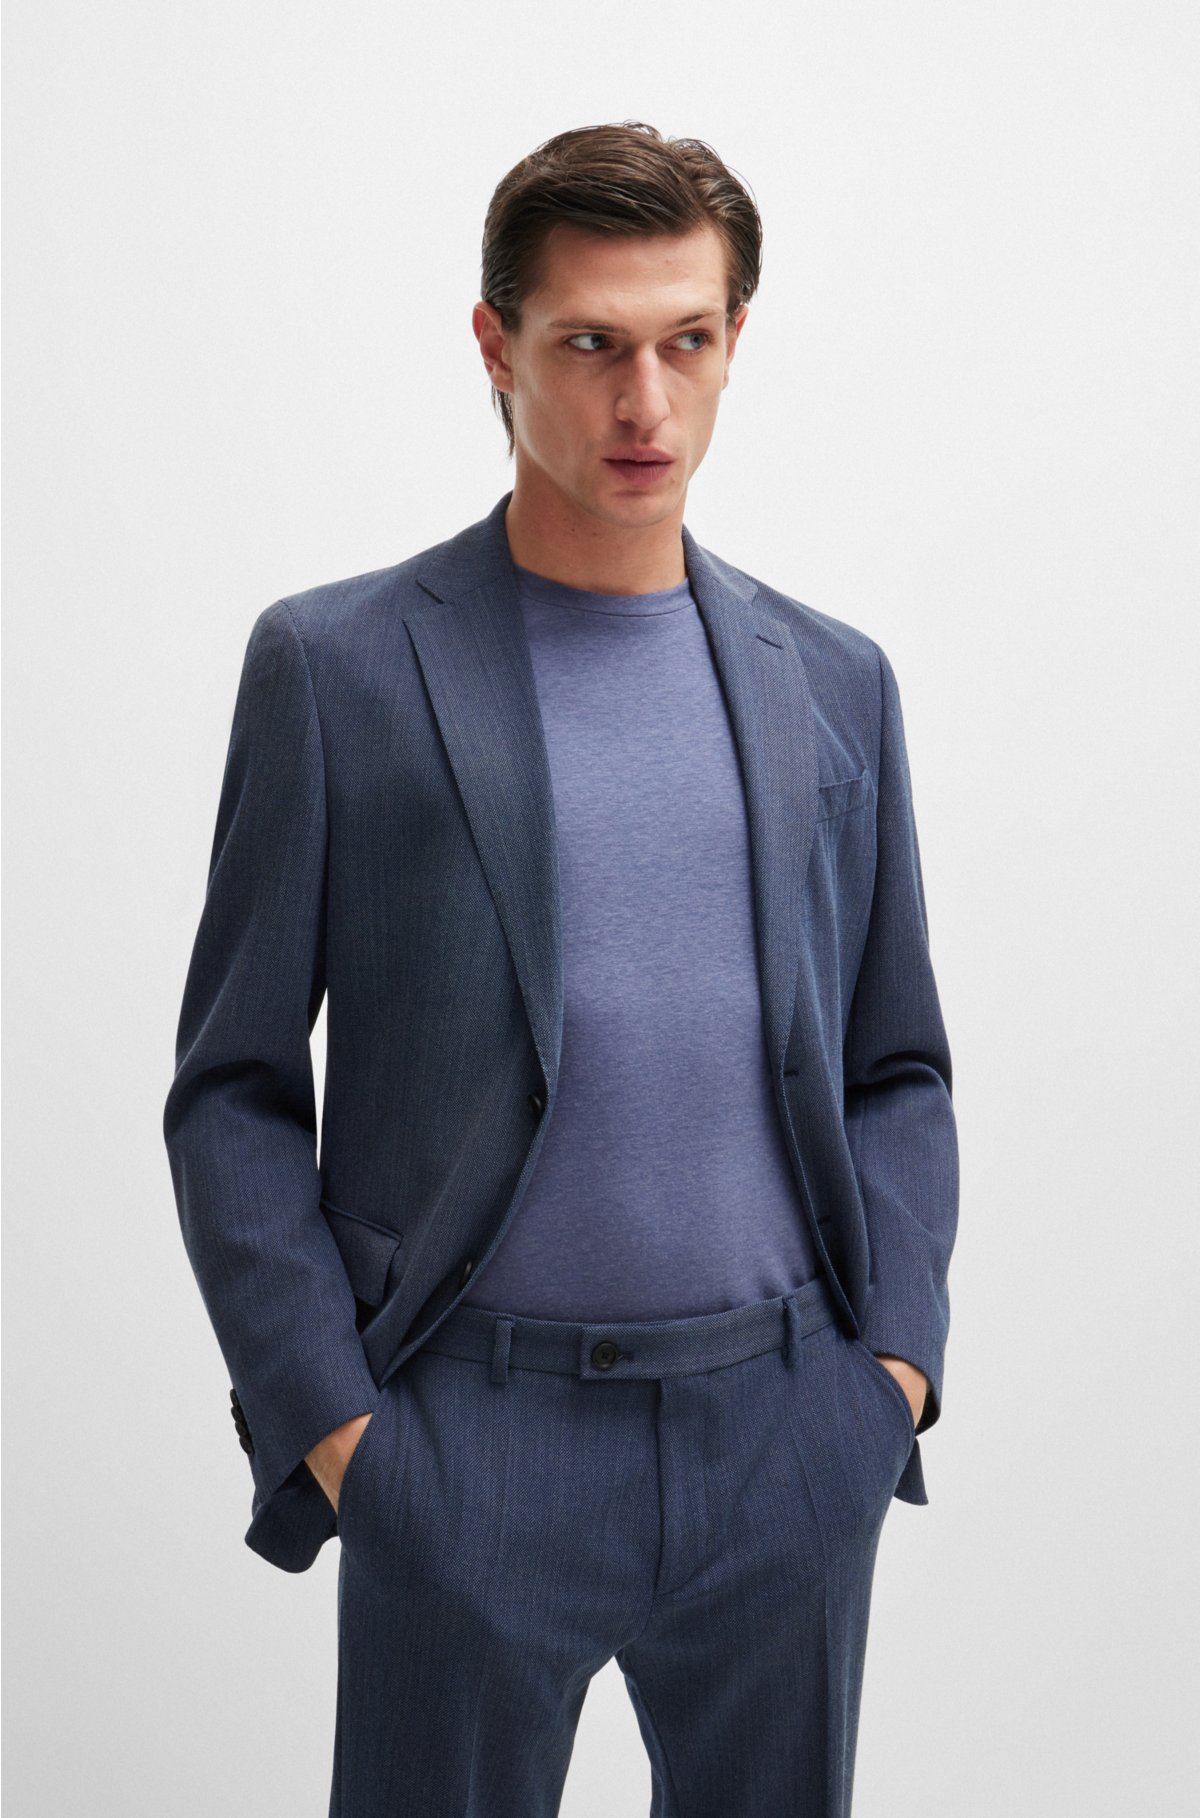 Slim-fit suit in micro-patterned performance fabric, Dark Blue